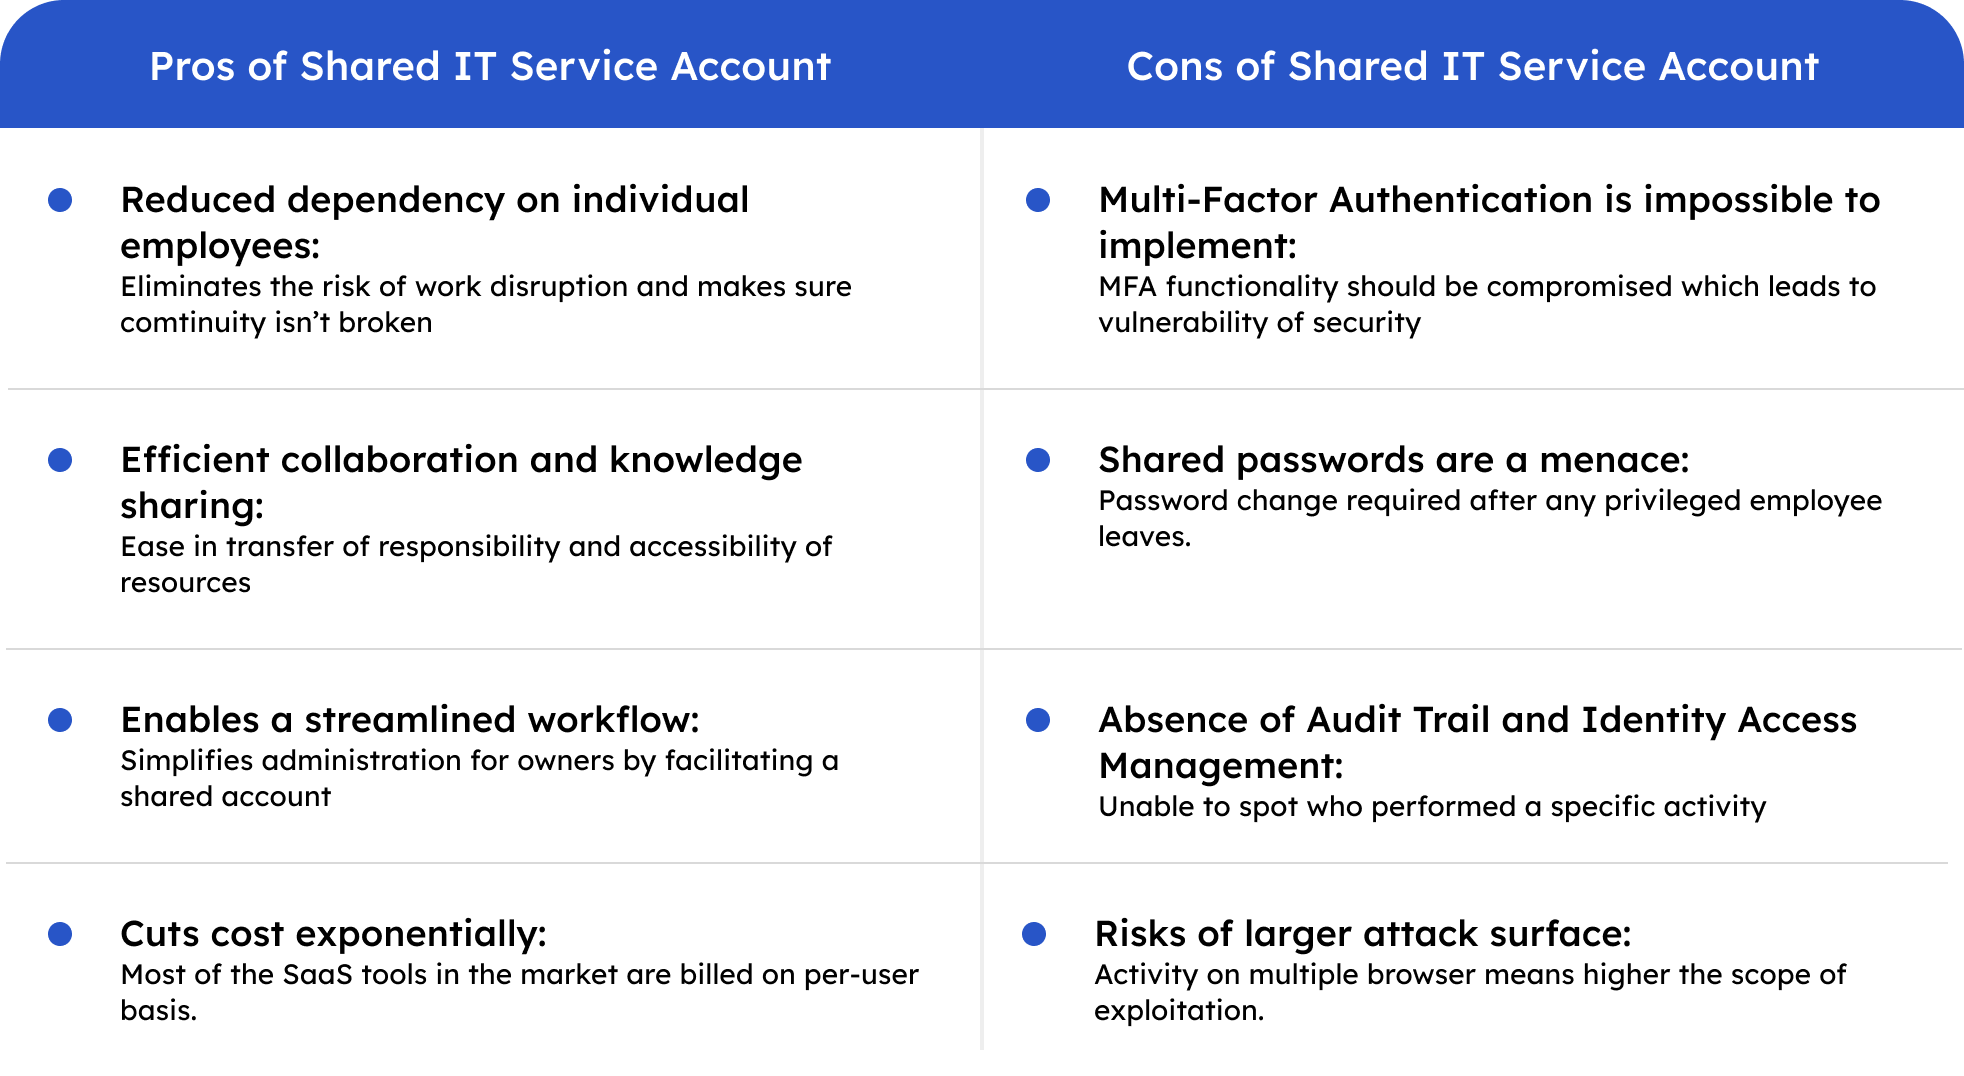 Pros and Cons of Shared IT Assets